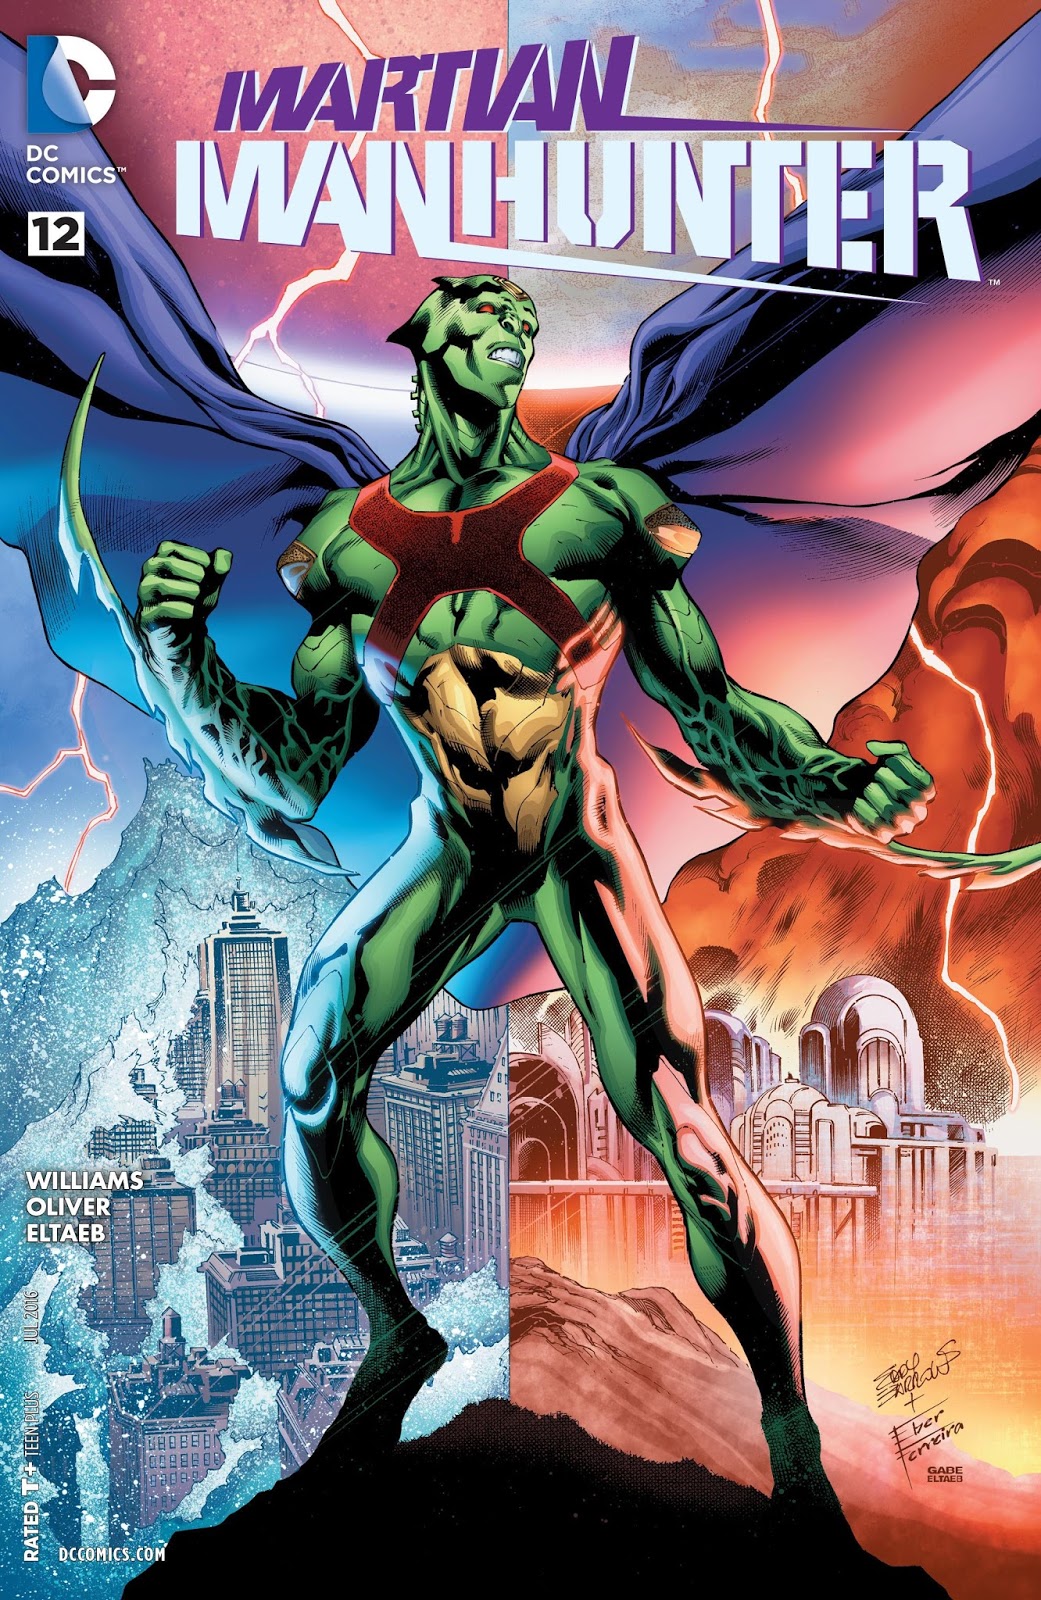 Person Of Color To Star in the upcoming Martian Manhunter movie